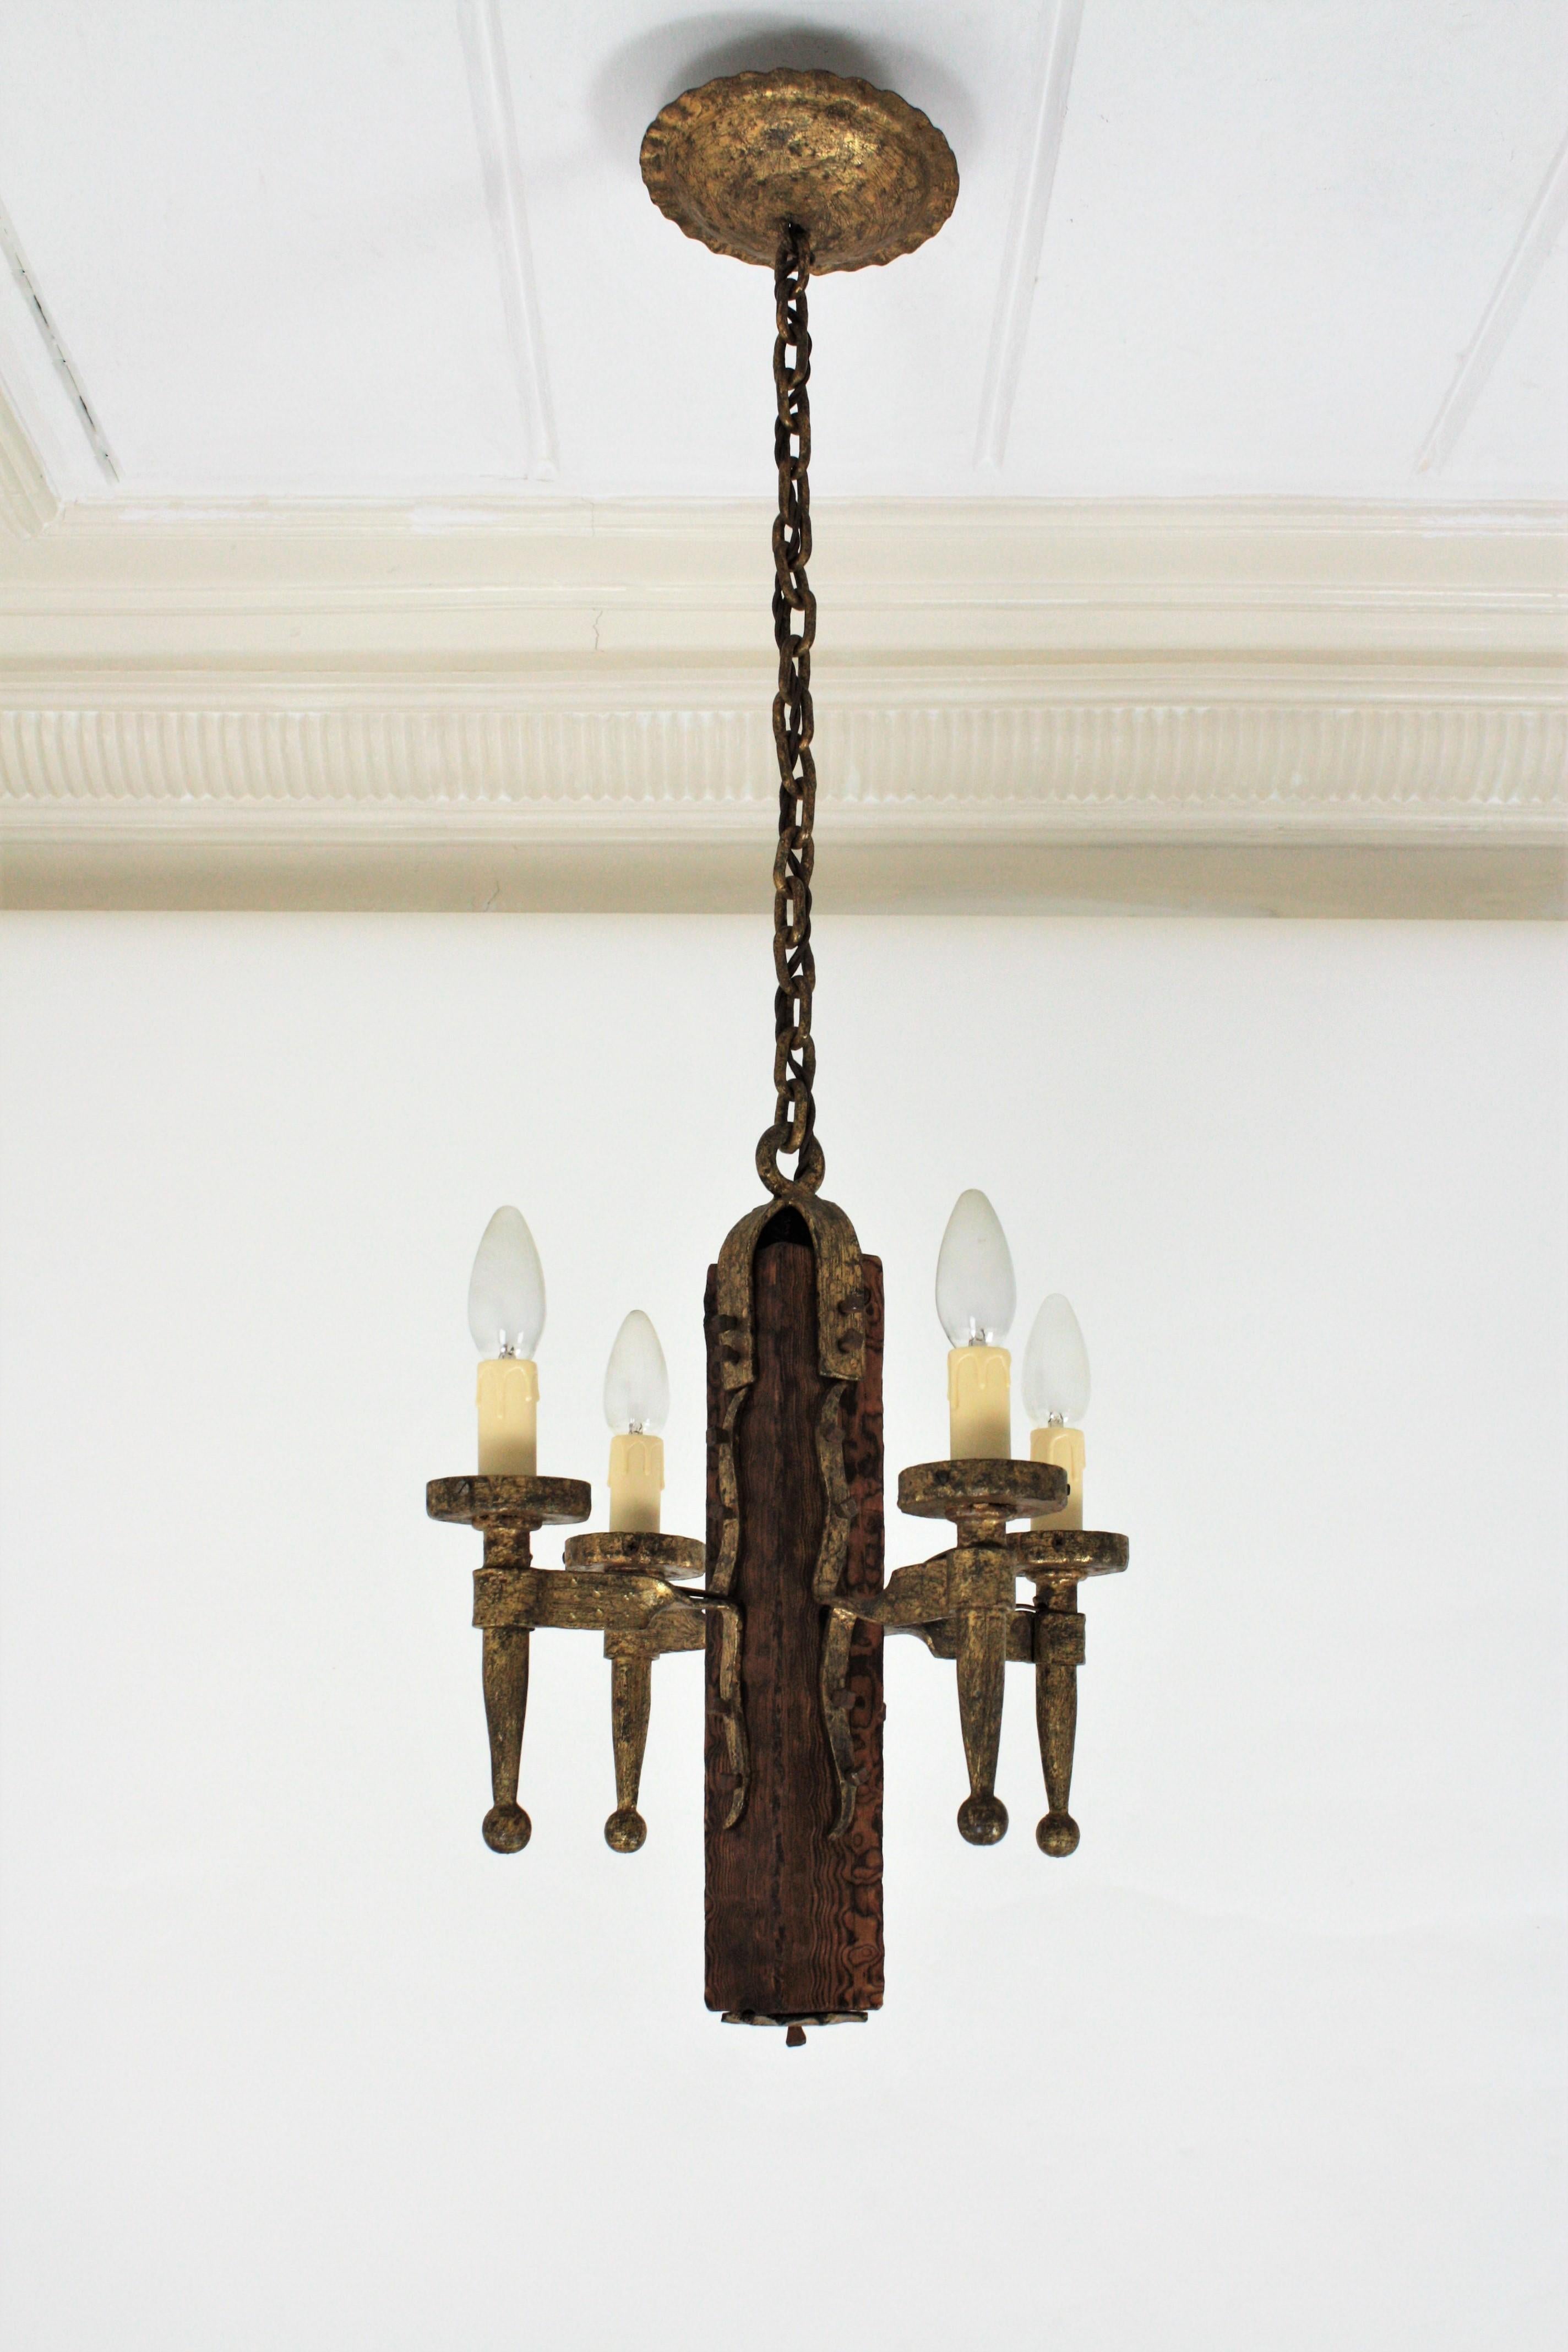 20th Century Spanish Gothic Style Chandelier in Gilt Wrought Iron and Wood with Nail Details